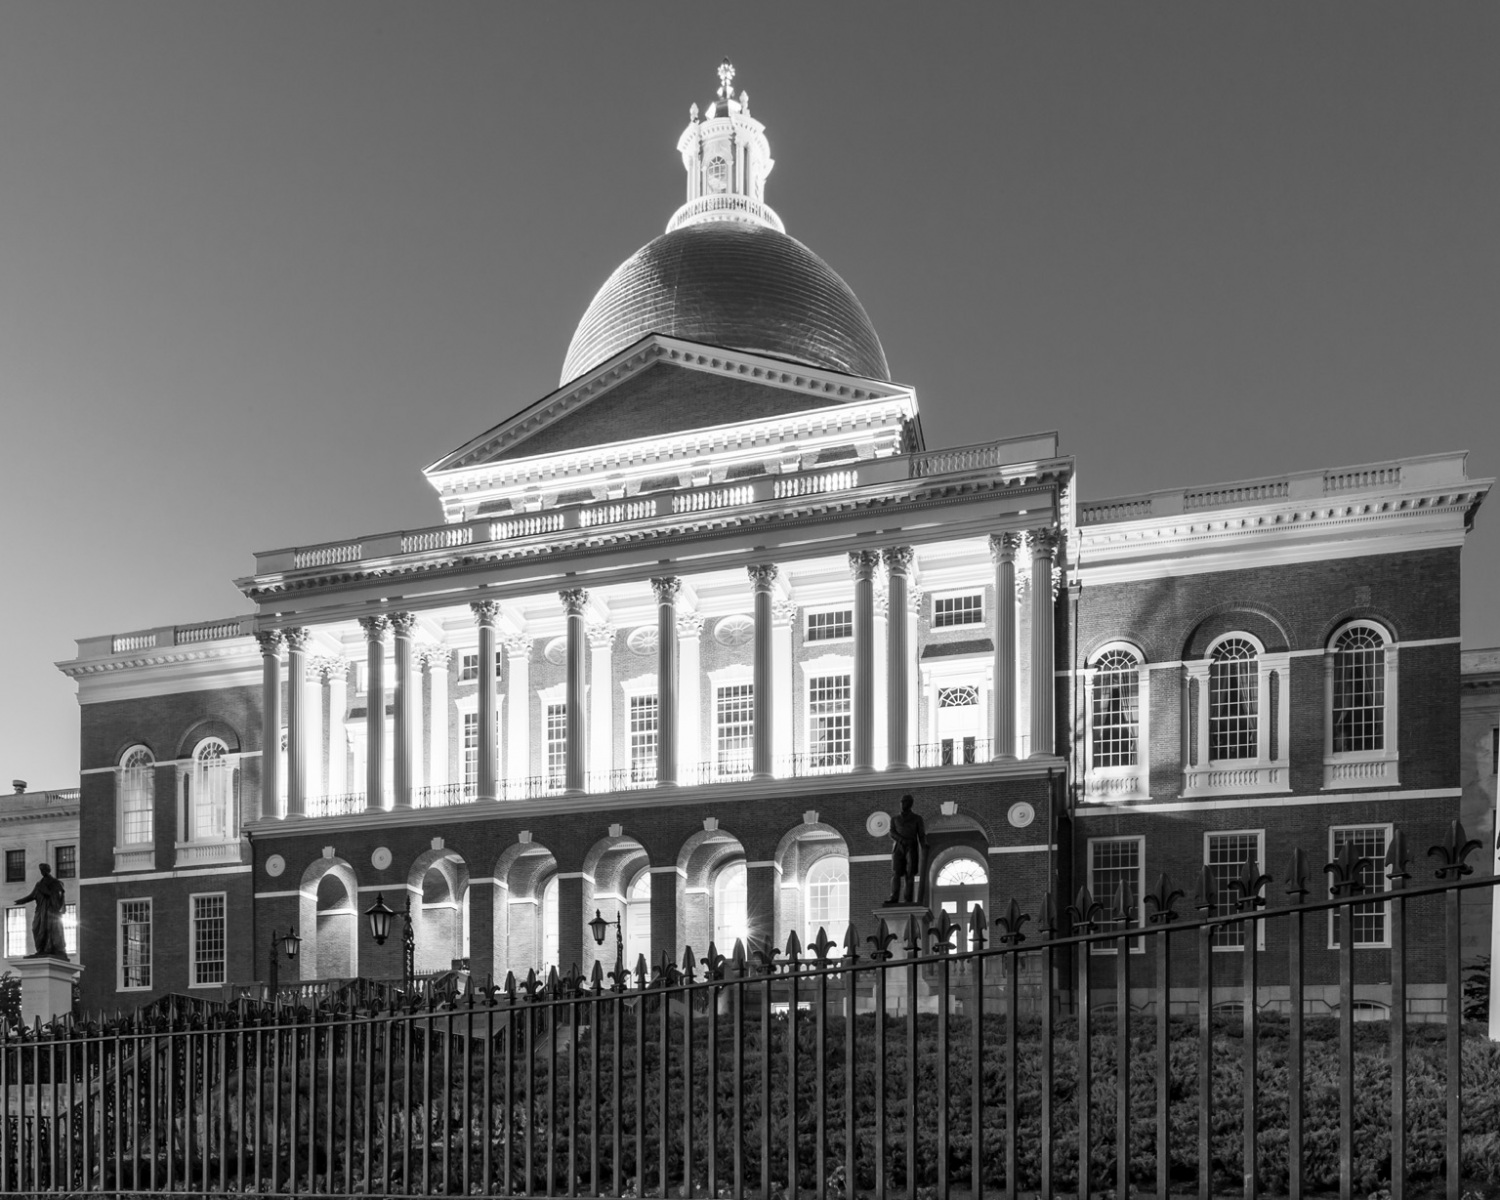 A photo of the Massachusetts State House at night.  Designed by Charles Bulfinch, the Federal style building, the Massachusetts state capitol, was constructed between 1795 and 1798.  The Massachusetts State House, located in Boston, is a National Historic Landmark.  This photo © Capitolshots Photography/TwoFiftyFour Photos, LLC, ALL RIGHTS RESERVED.